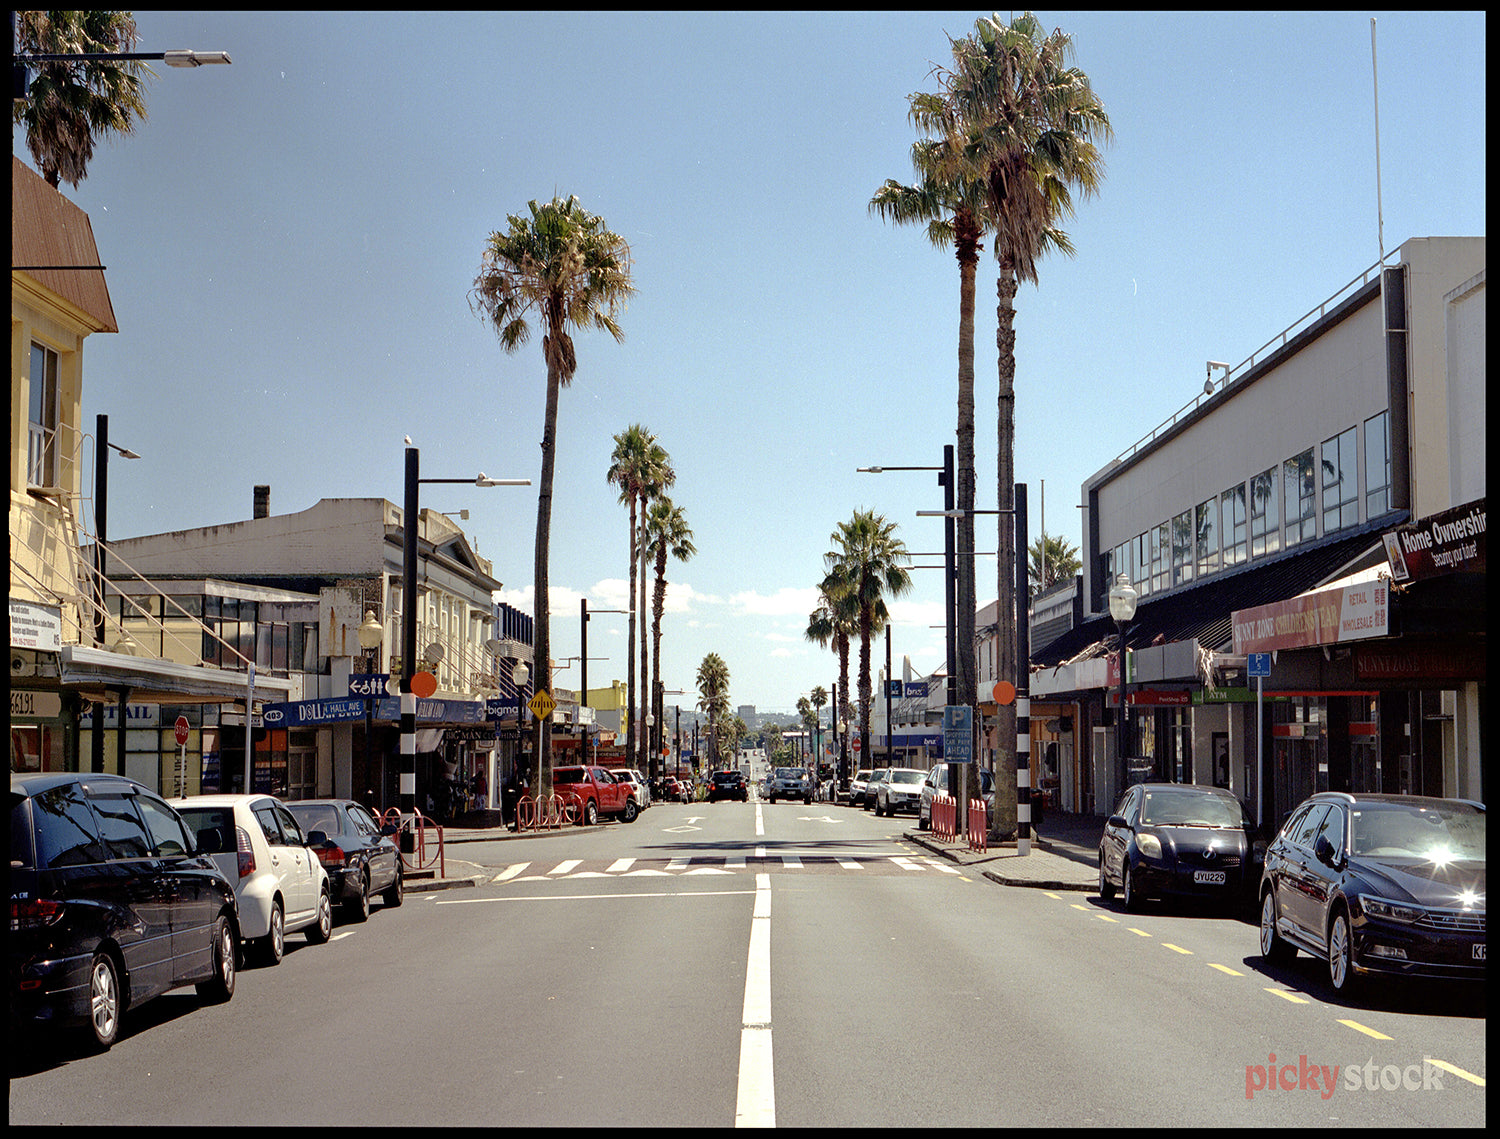 Down the mainstream of Otahuhu main street with palm trees in the distance. 